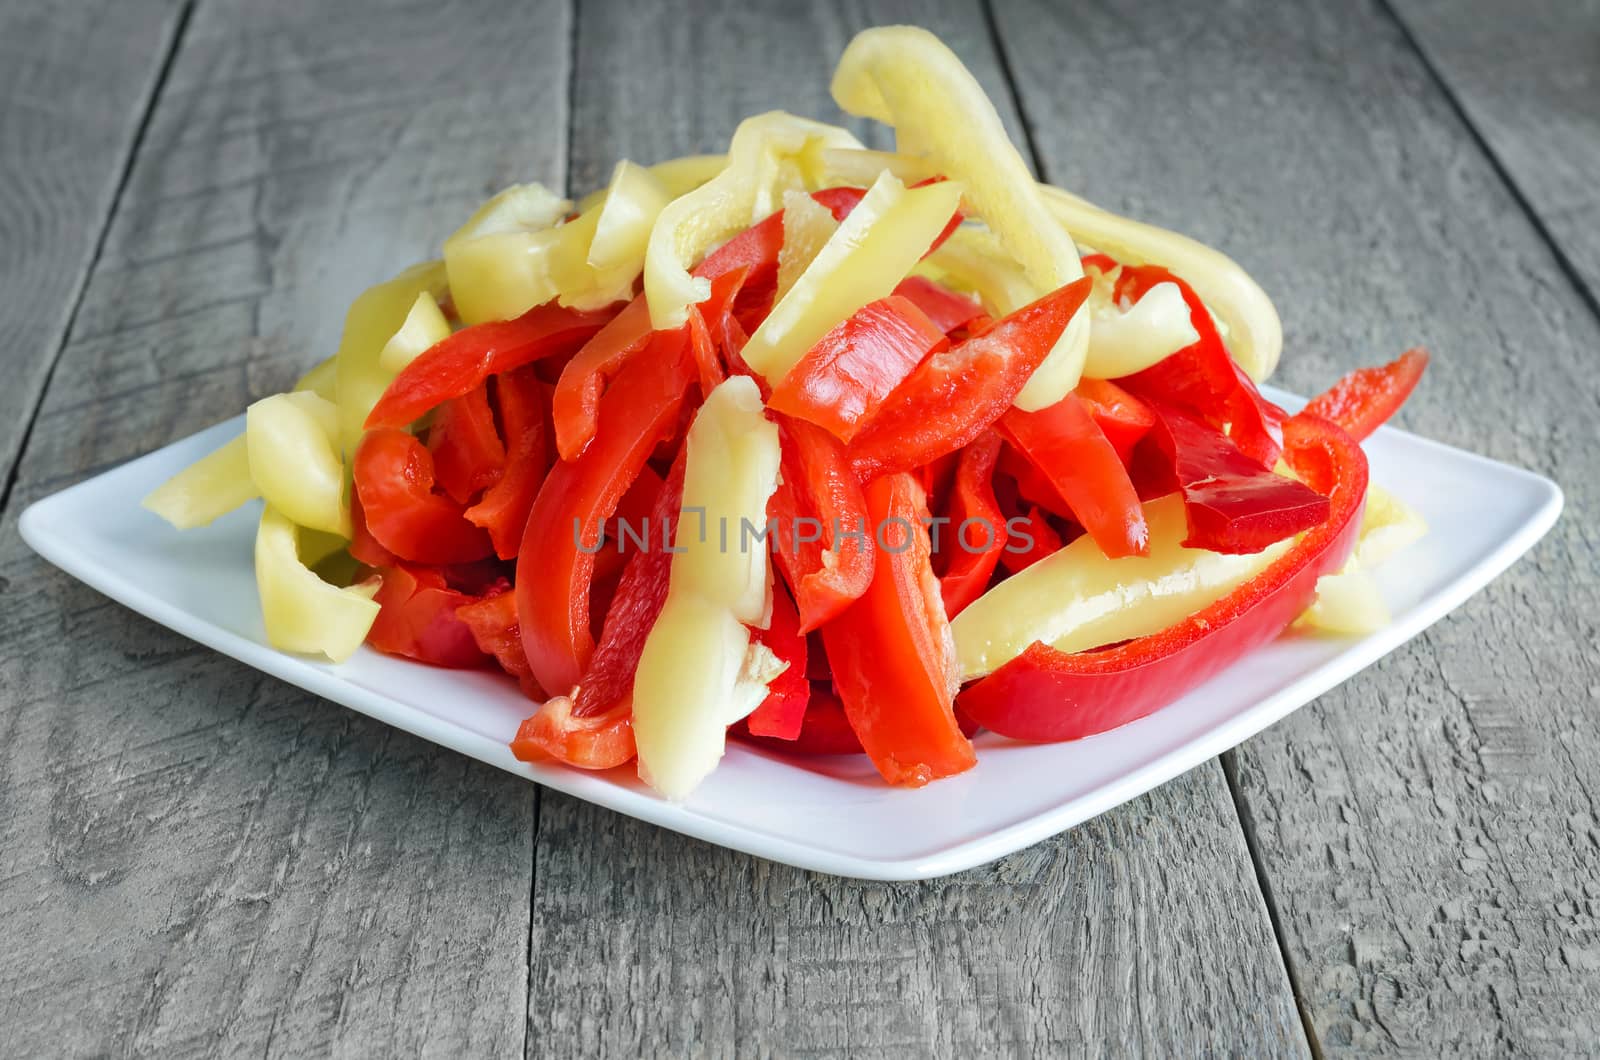 Chopped sweet pepper, white plate and wooden background.